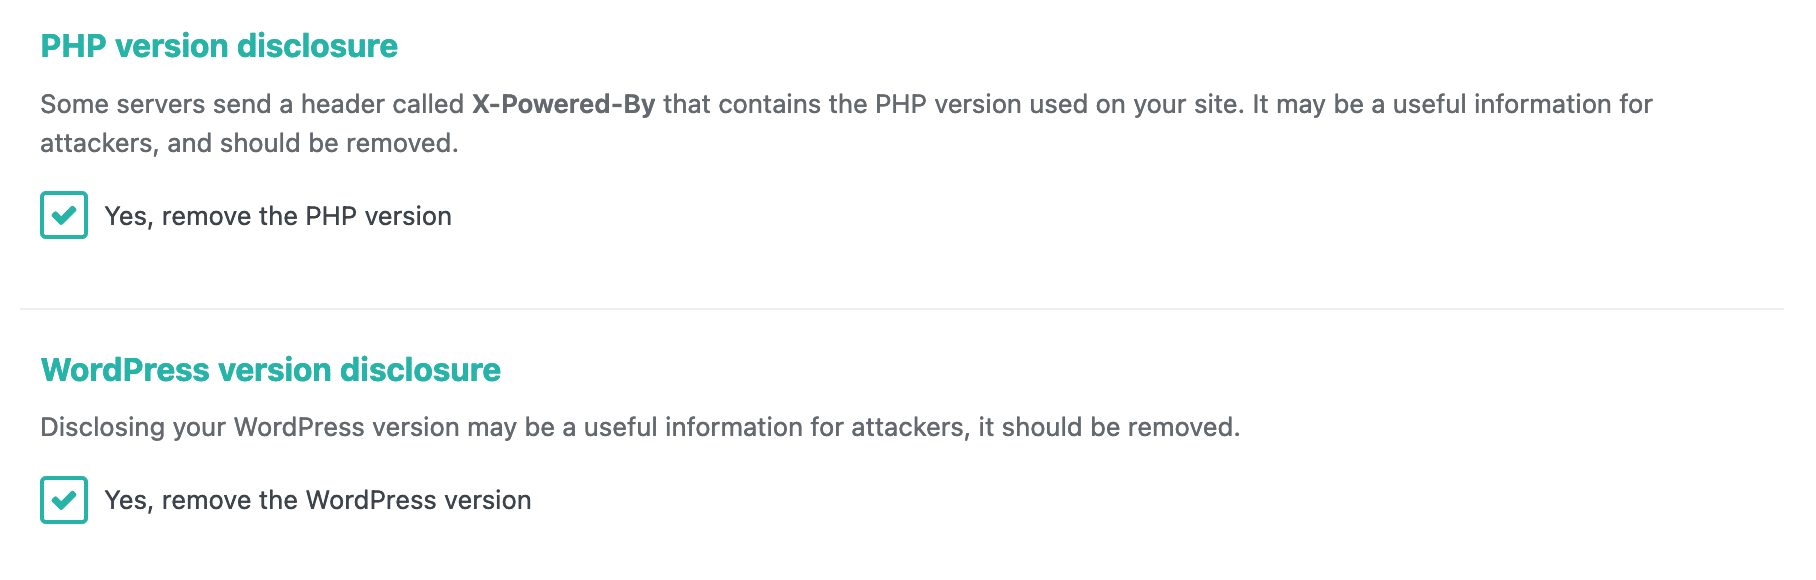 SecuPress allows you to mask your PHP version.